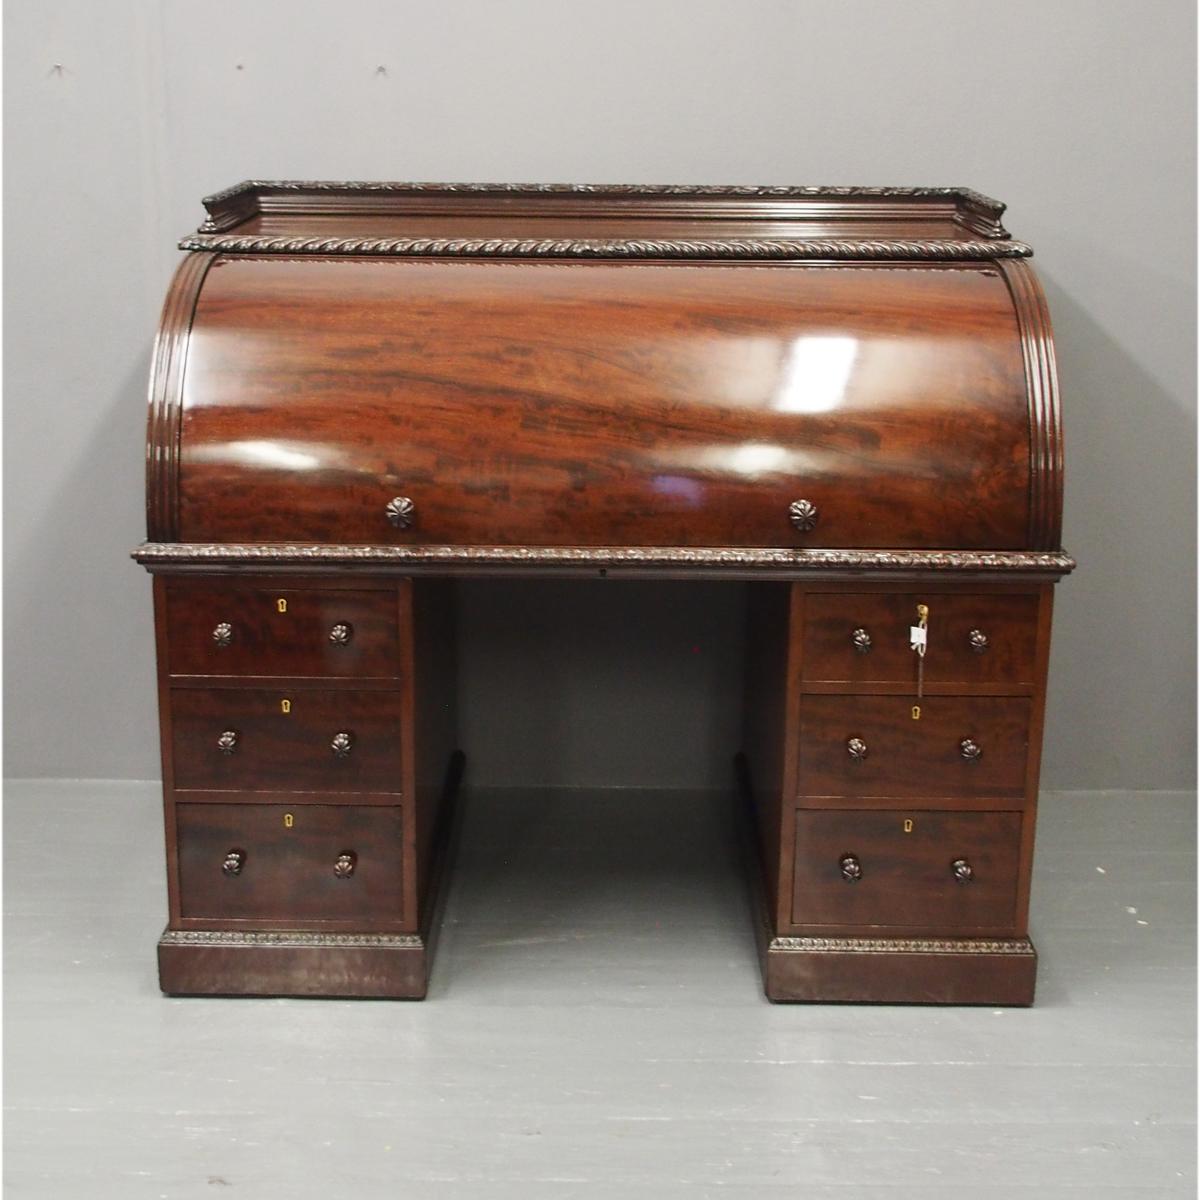 Mahogany roll top cylinder bureau, circa 1890. With a carved three quarter gallery with gadrooned fore-edge above a cylinder top opening to a configuration of pigeon holes and drawers. With a pullout / pull-out slide with tooled leather writing